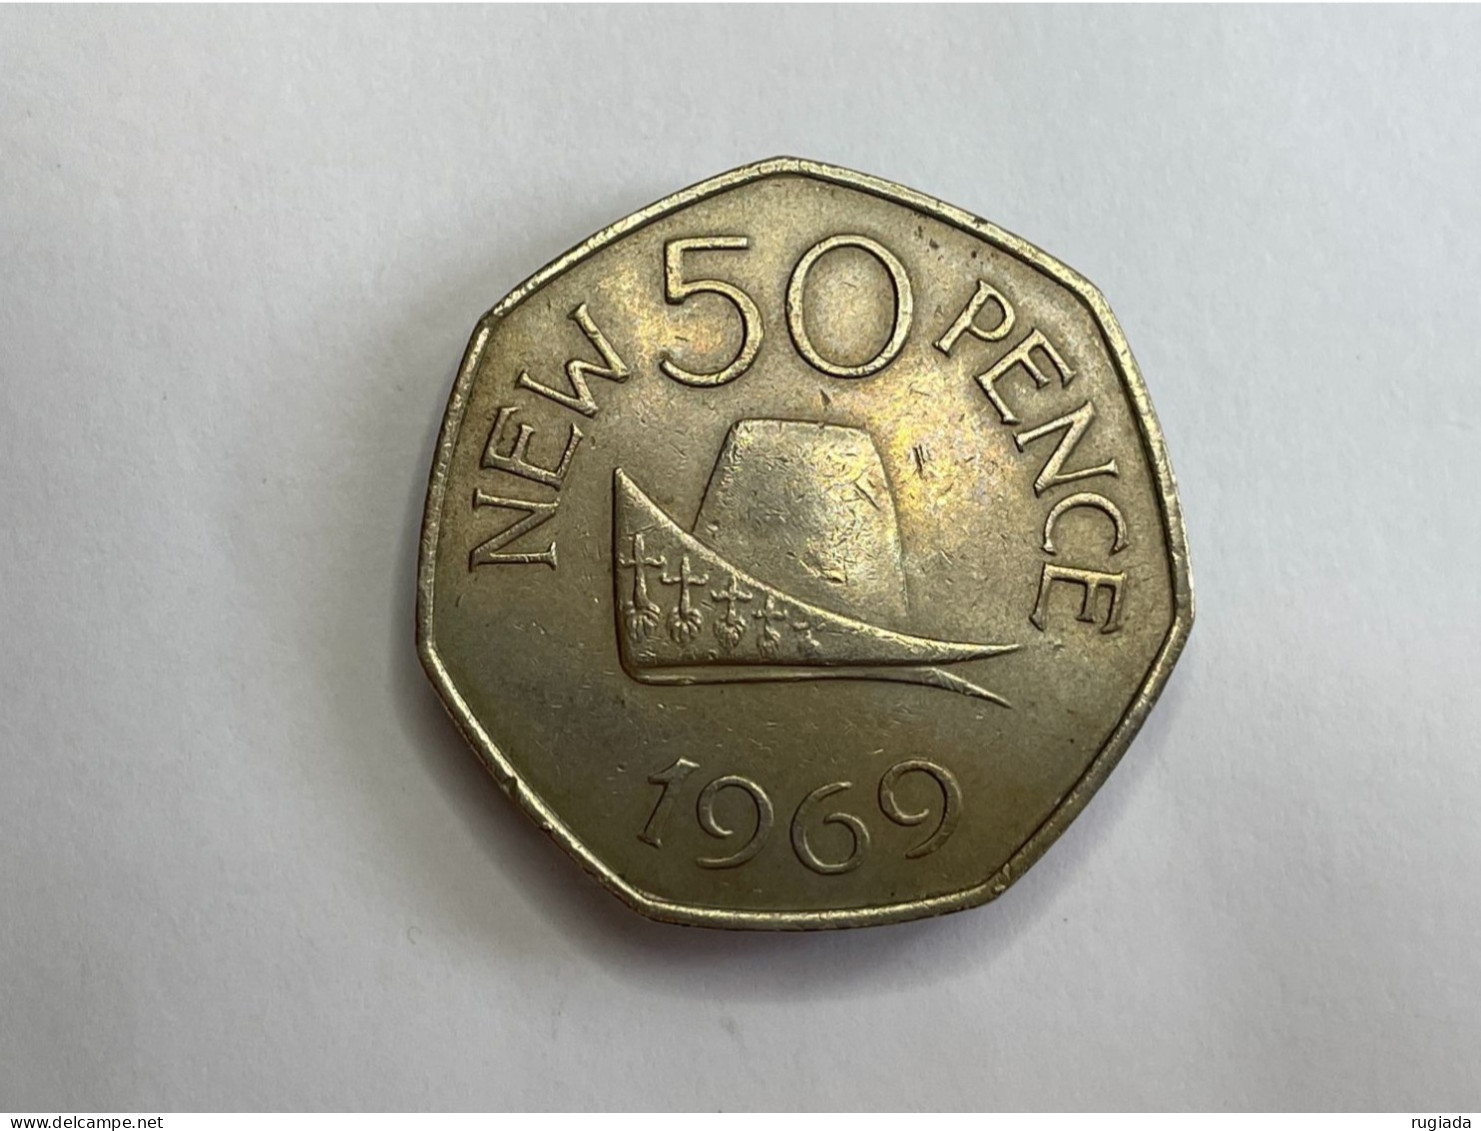 1969 UK Guernsey 50 Pence Coin, XF Extremely Fine - Kanaaleilanden